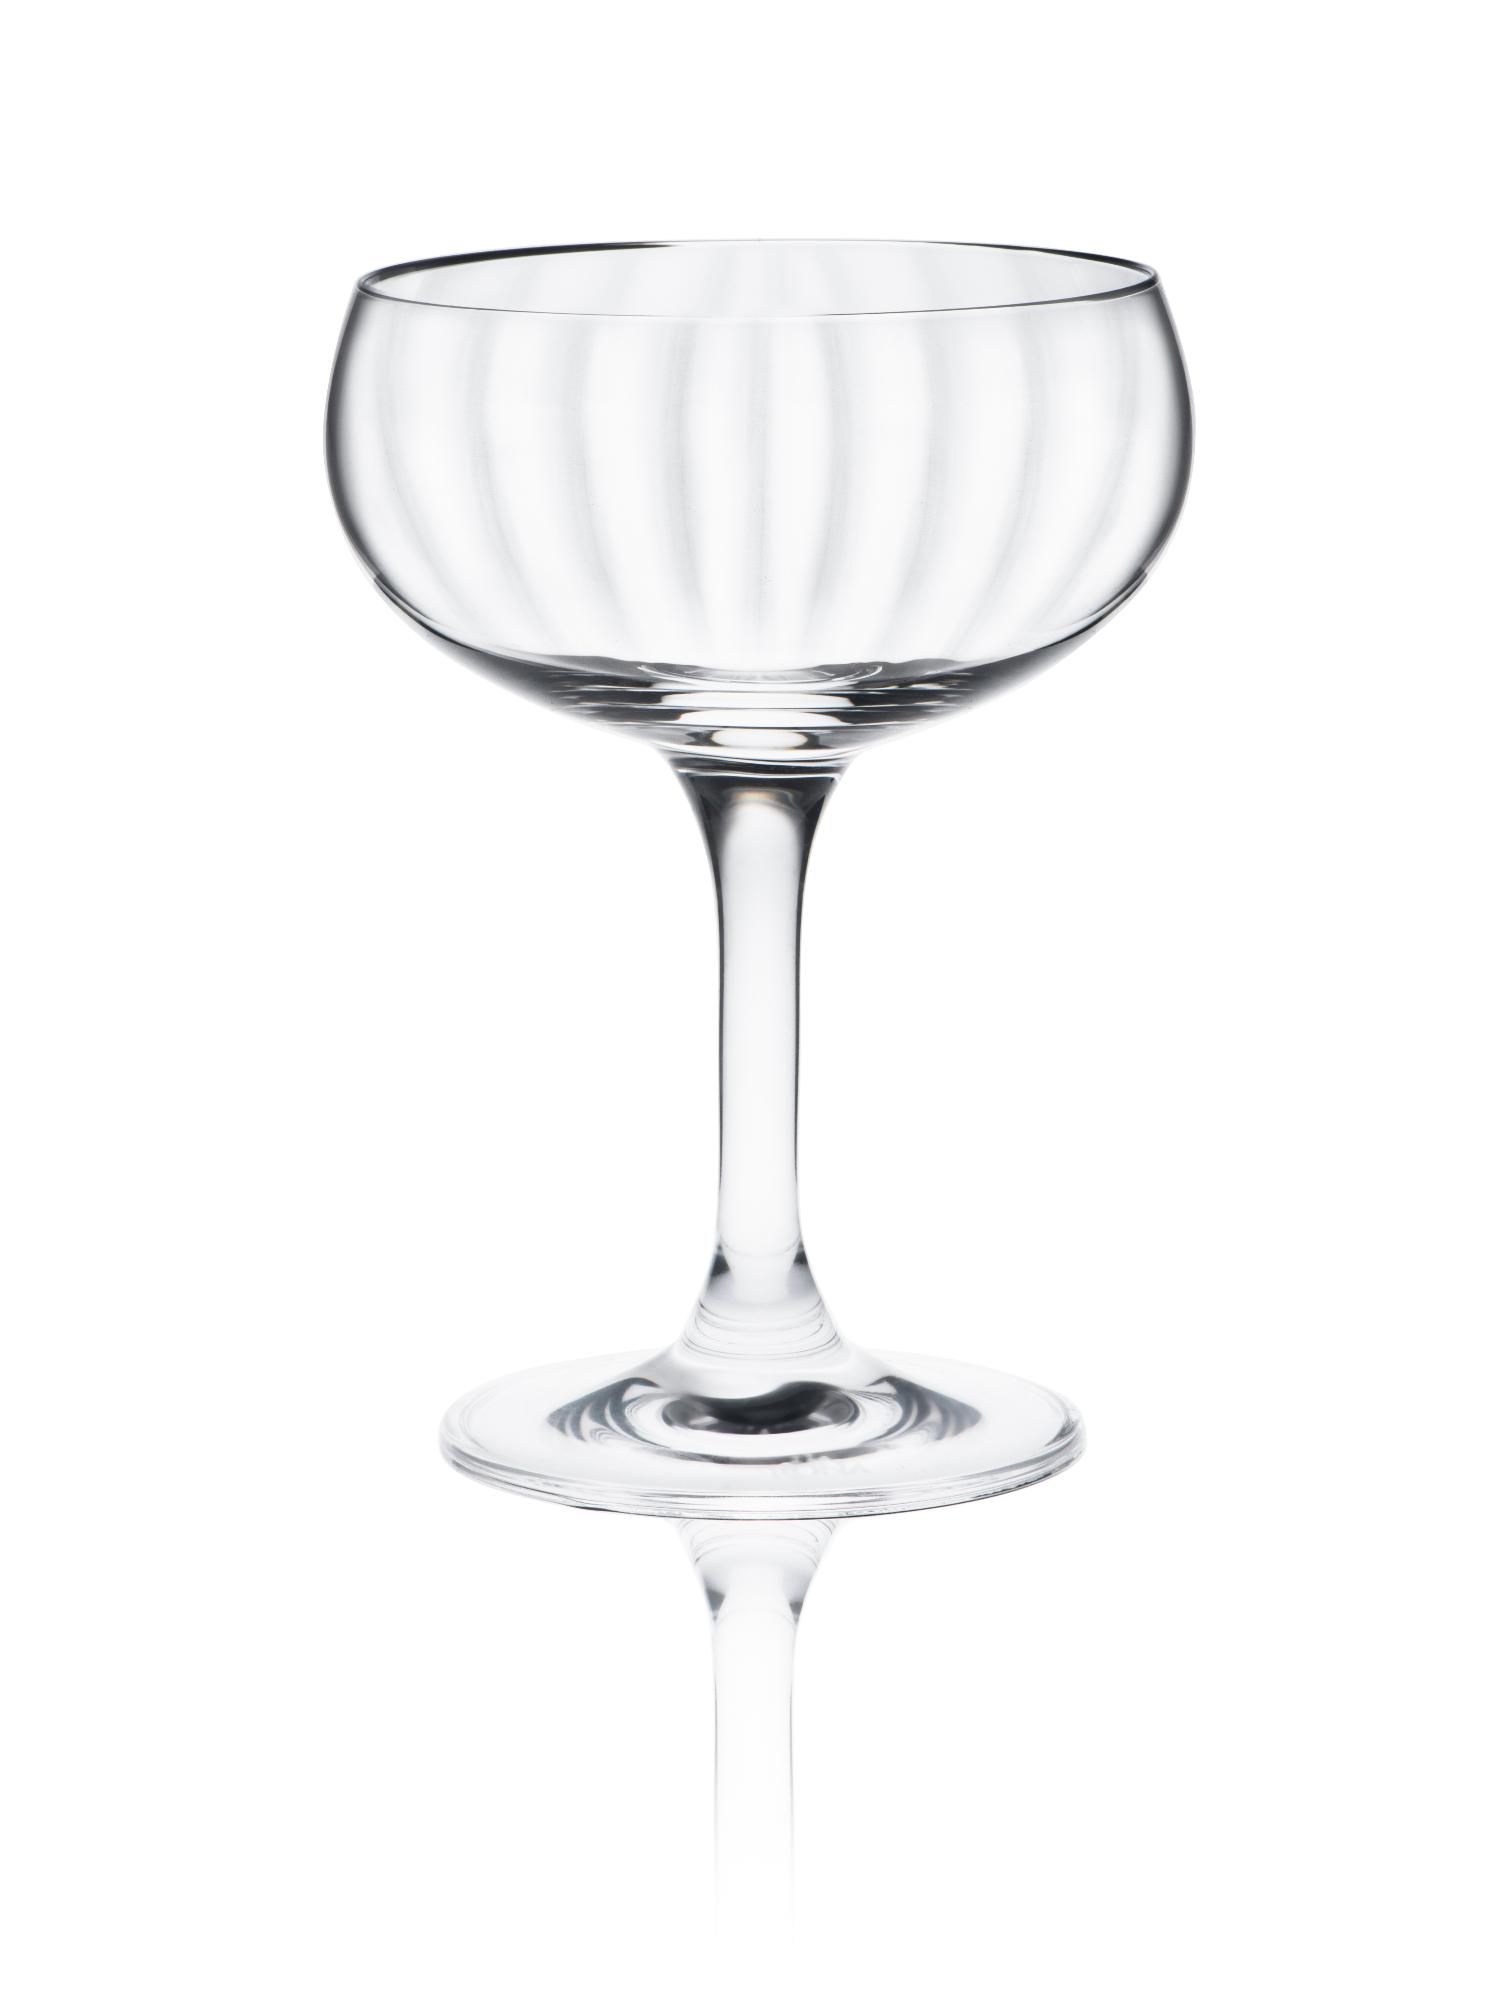 Classic Cocktails Optik coupe champagne glass, 260ml